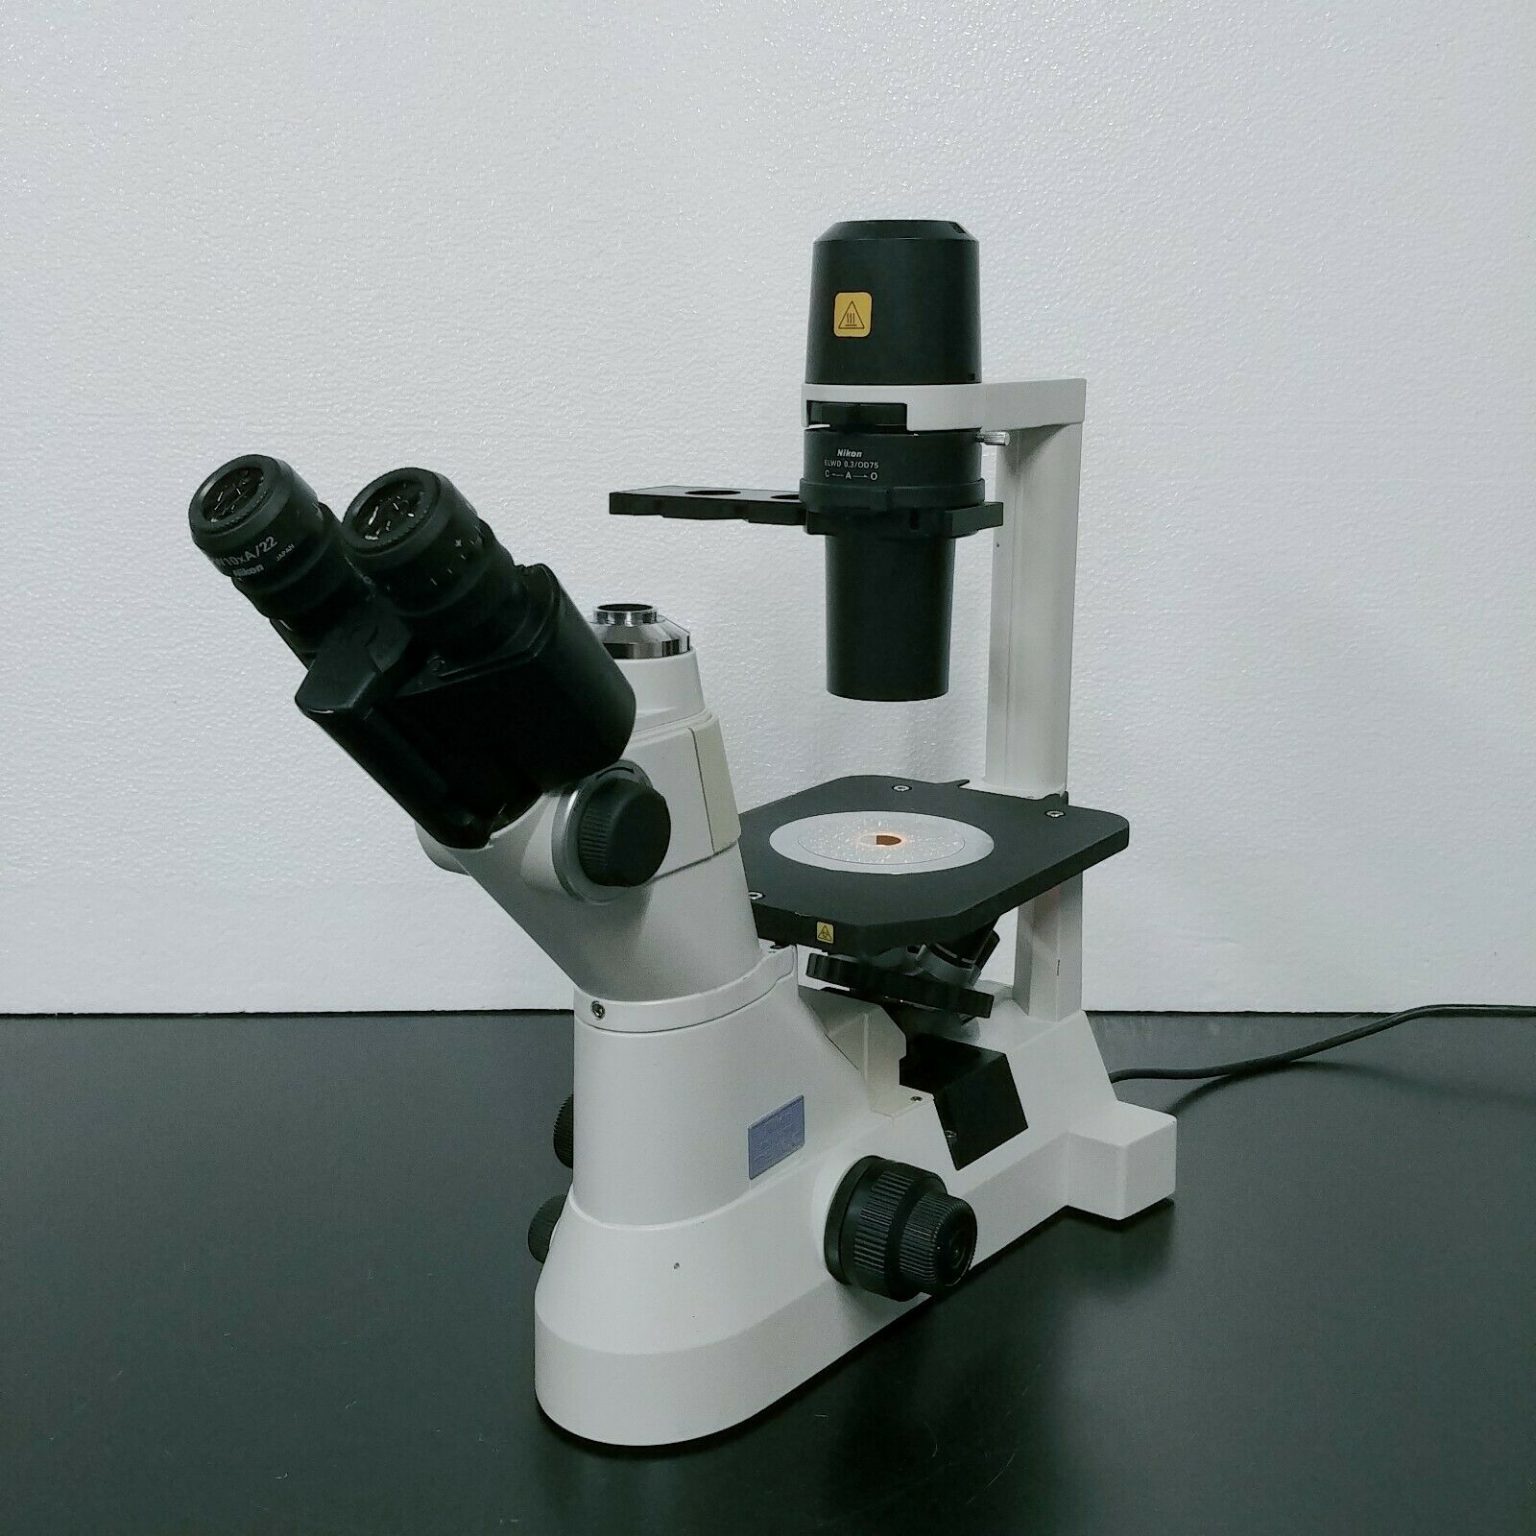 Nikon Microscope Eclipse Ts100 Inverted With Phase Contrast And